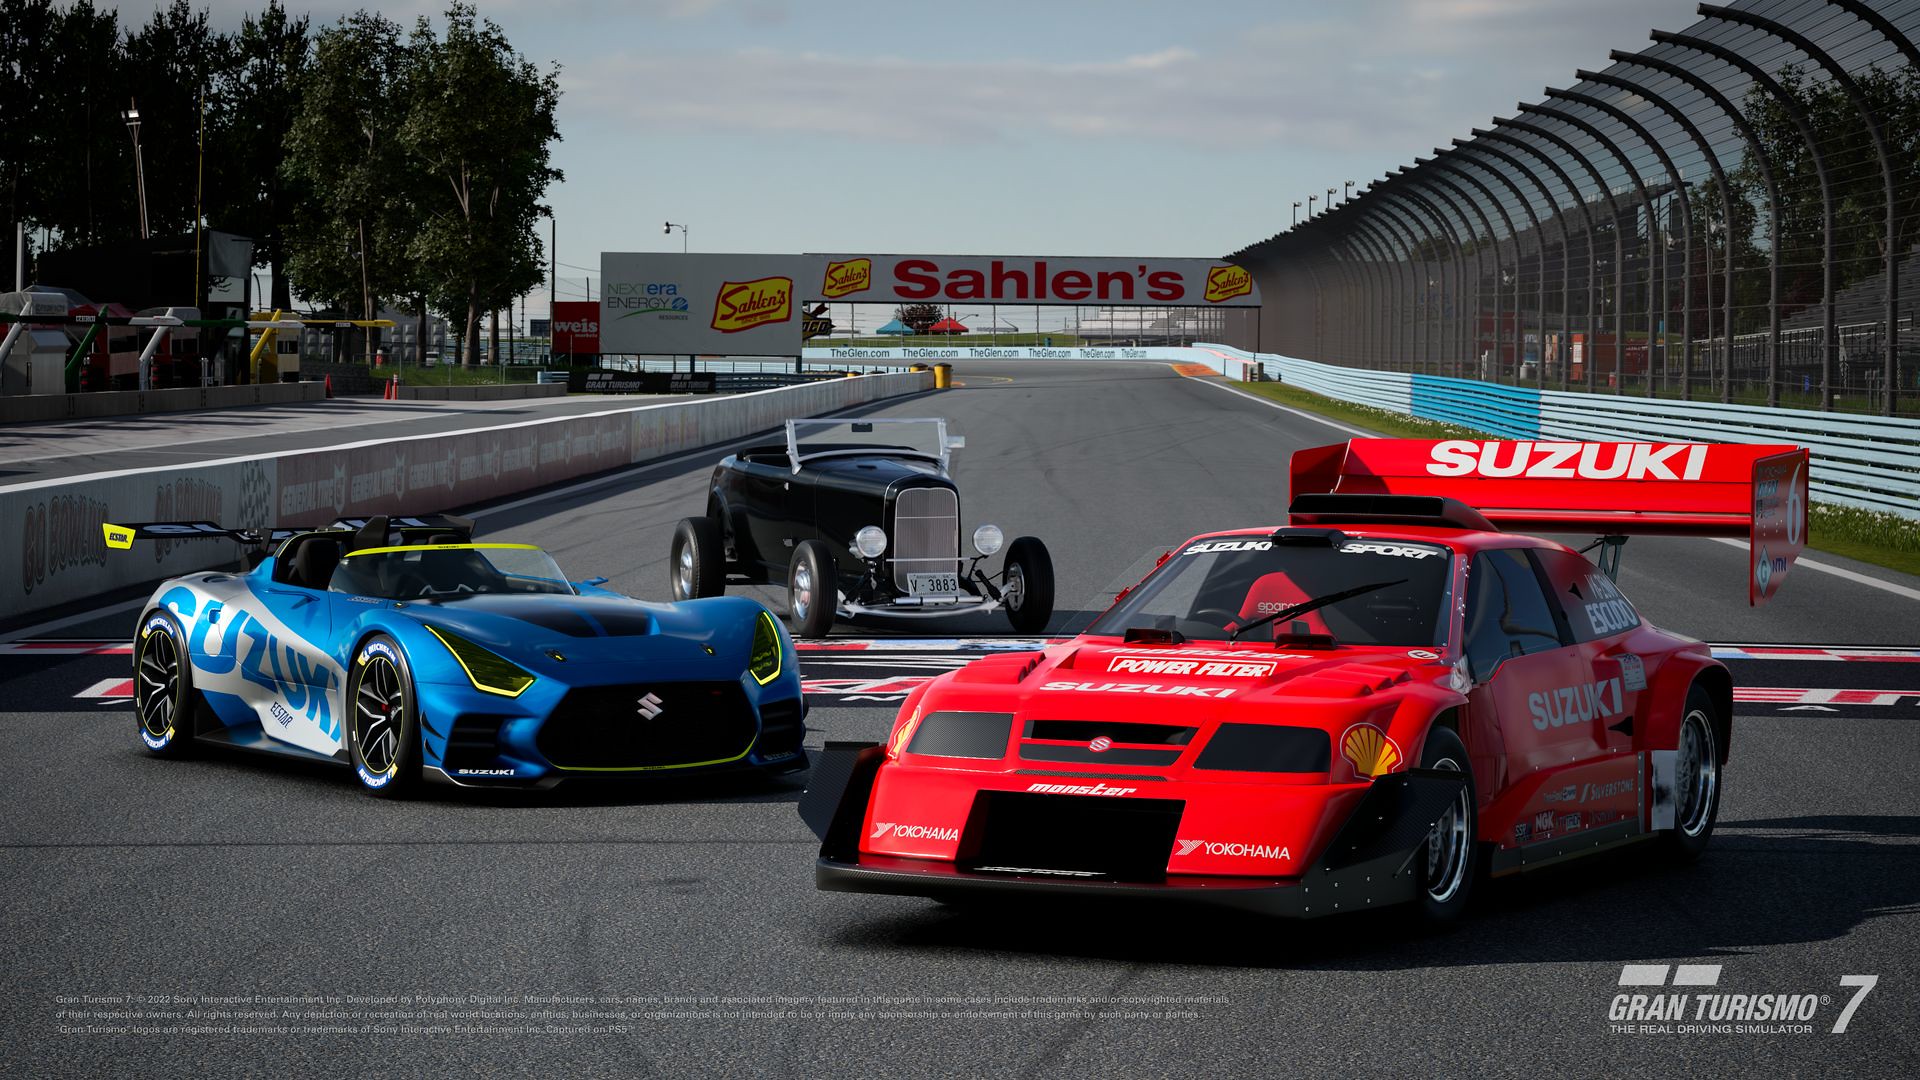 Gran Turismo 7 - three legendary cars, made up of two Suzuki race cars and the 1932 Ford Roaster, posed at a racing arena’s finish line.